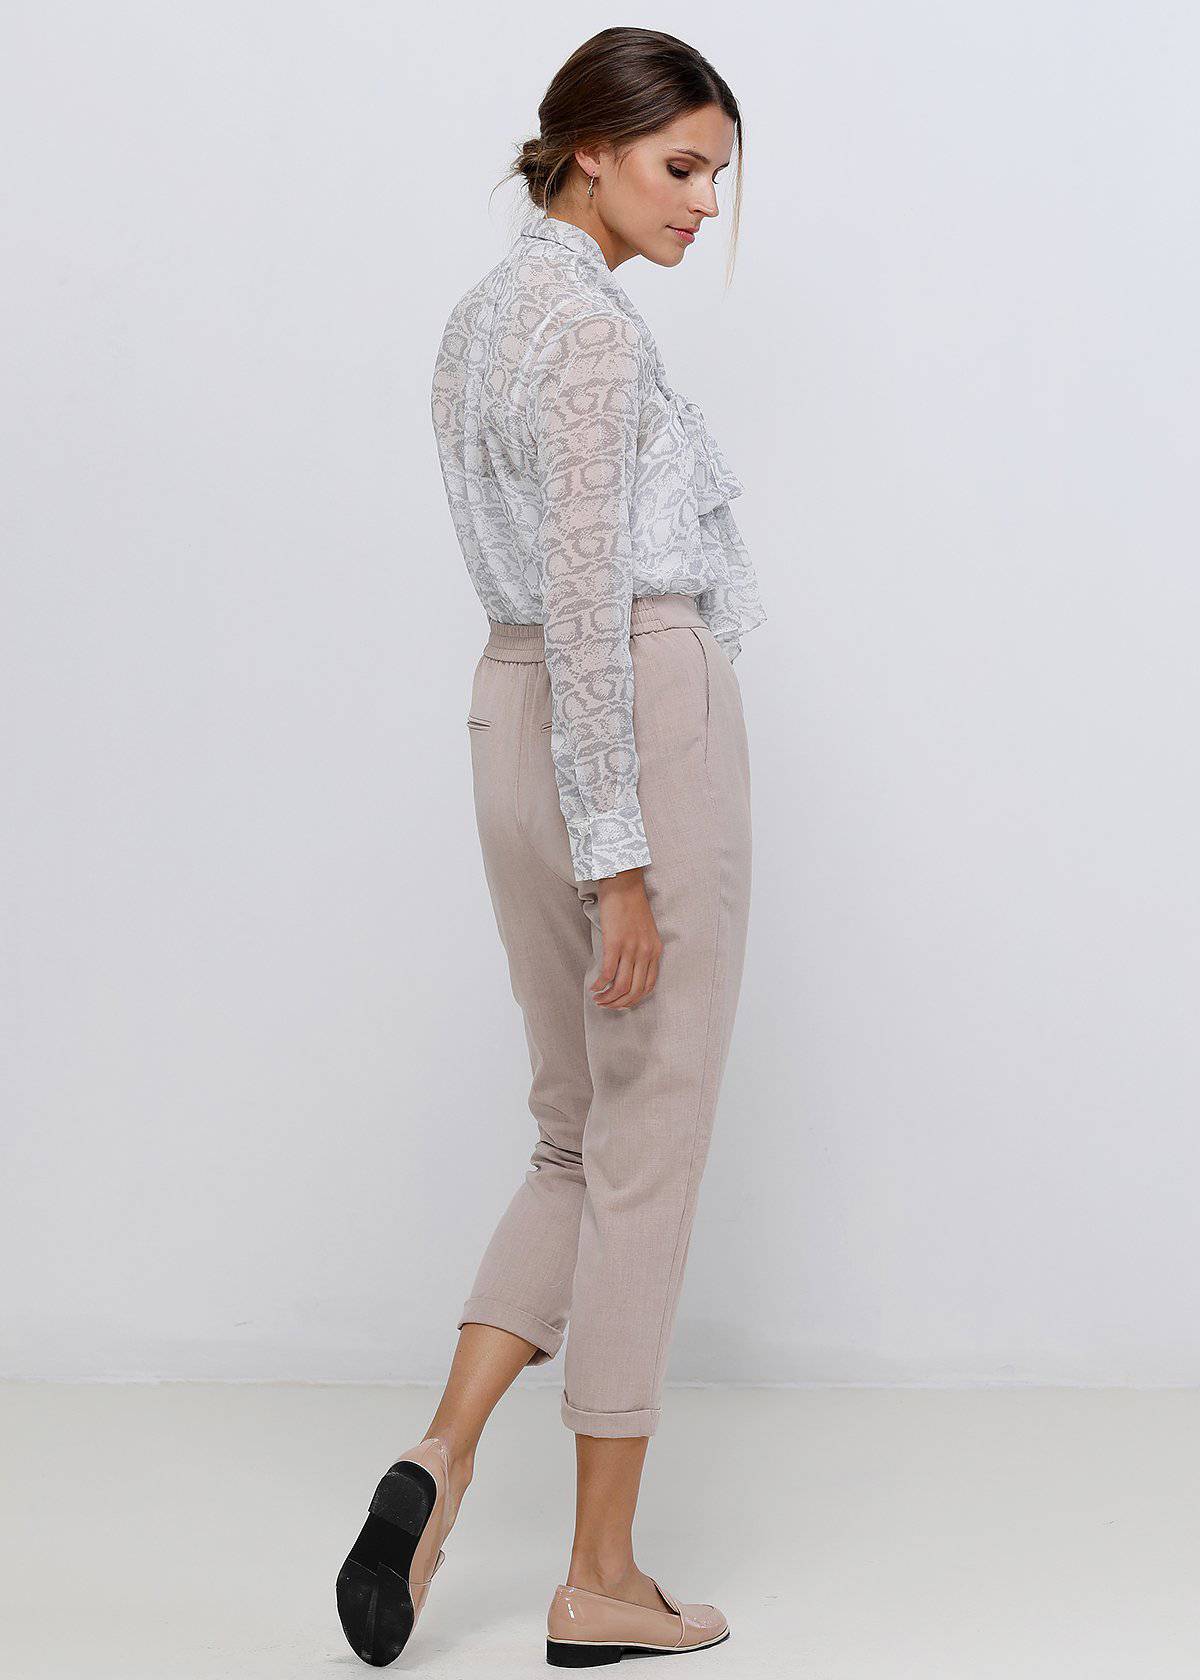 Tie Neck Sheer Blouse In Ivory Silver